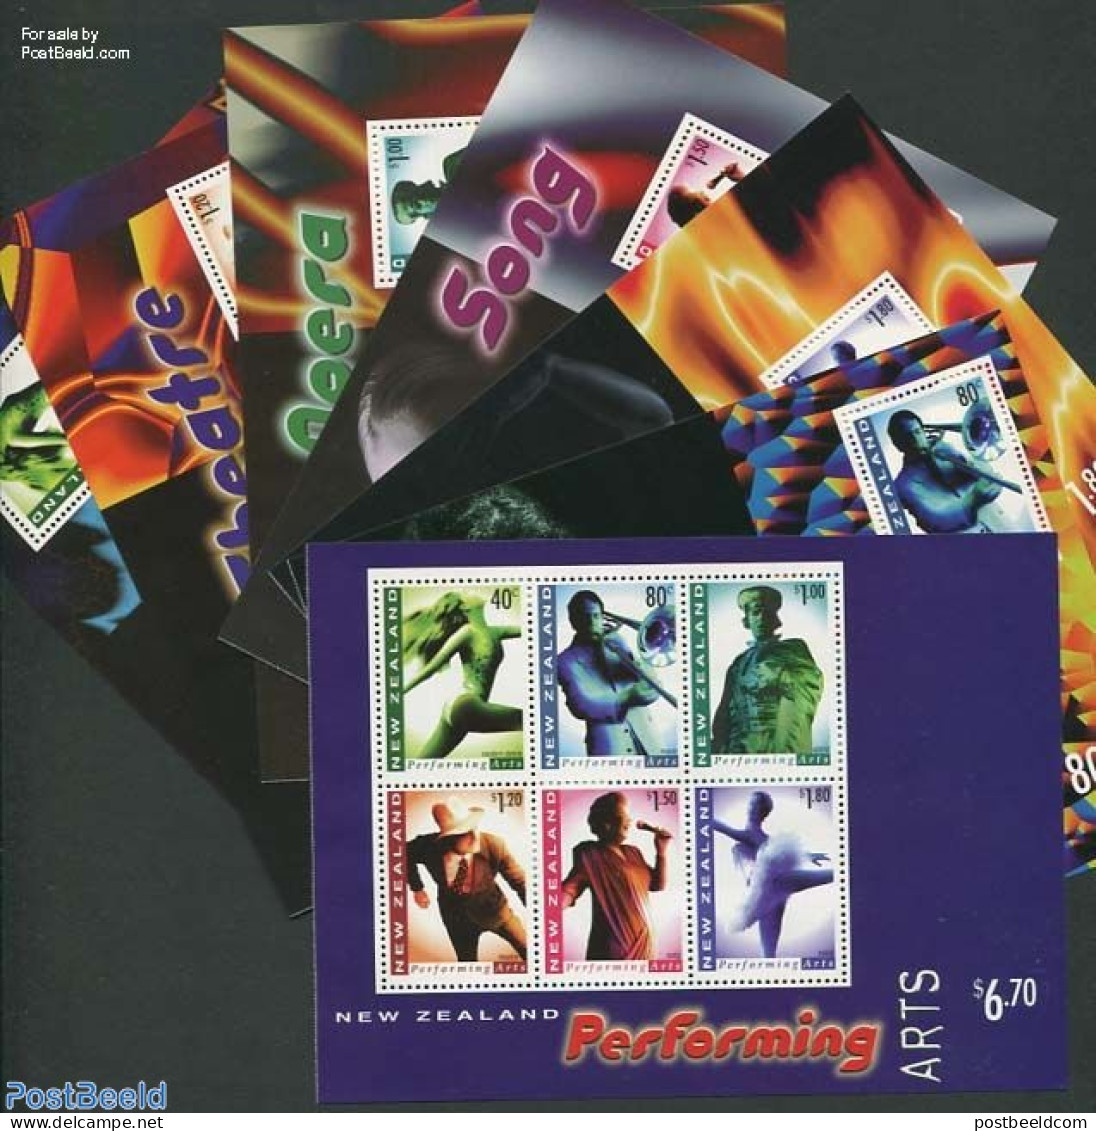 New Zealand 1998 Performing Arts 7 Booklet Panes, Mint NH, Performance Art - Dance & Ballet - Music - Theatre - Unused Stamps